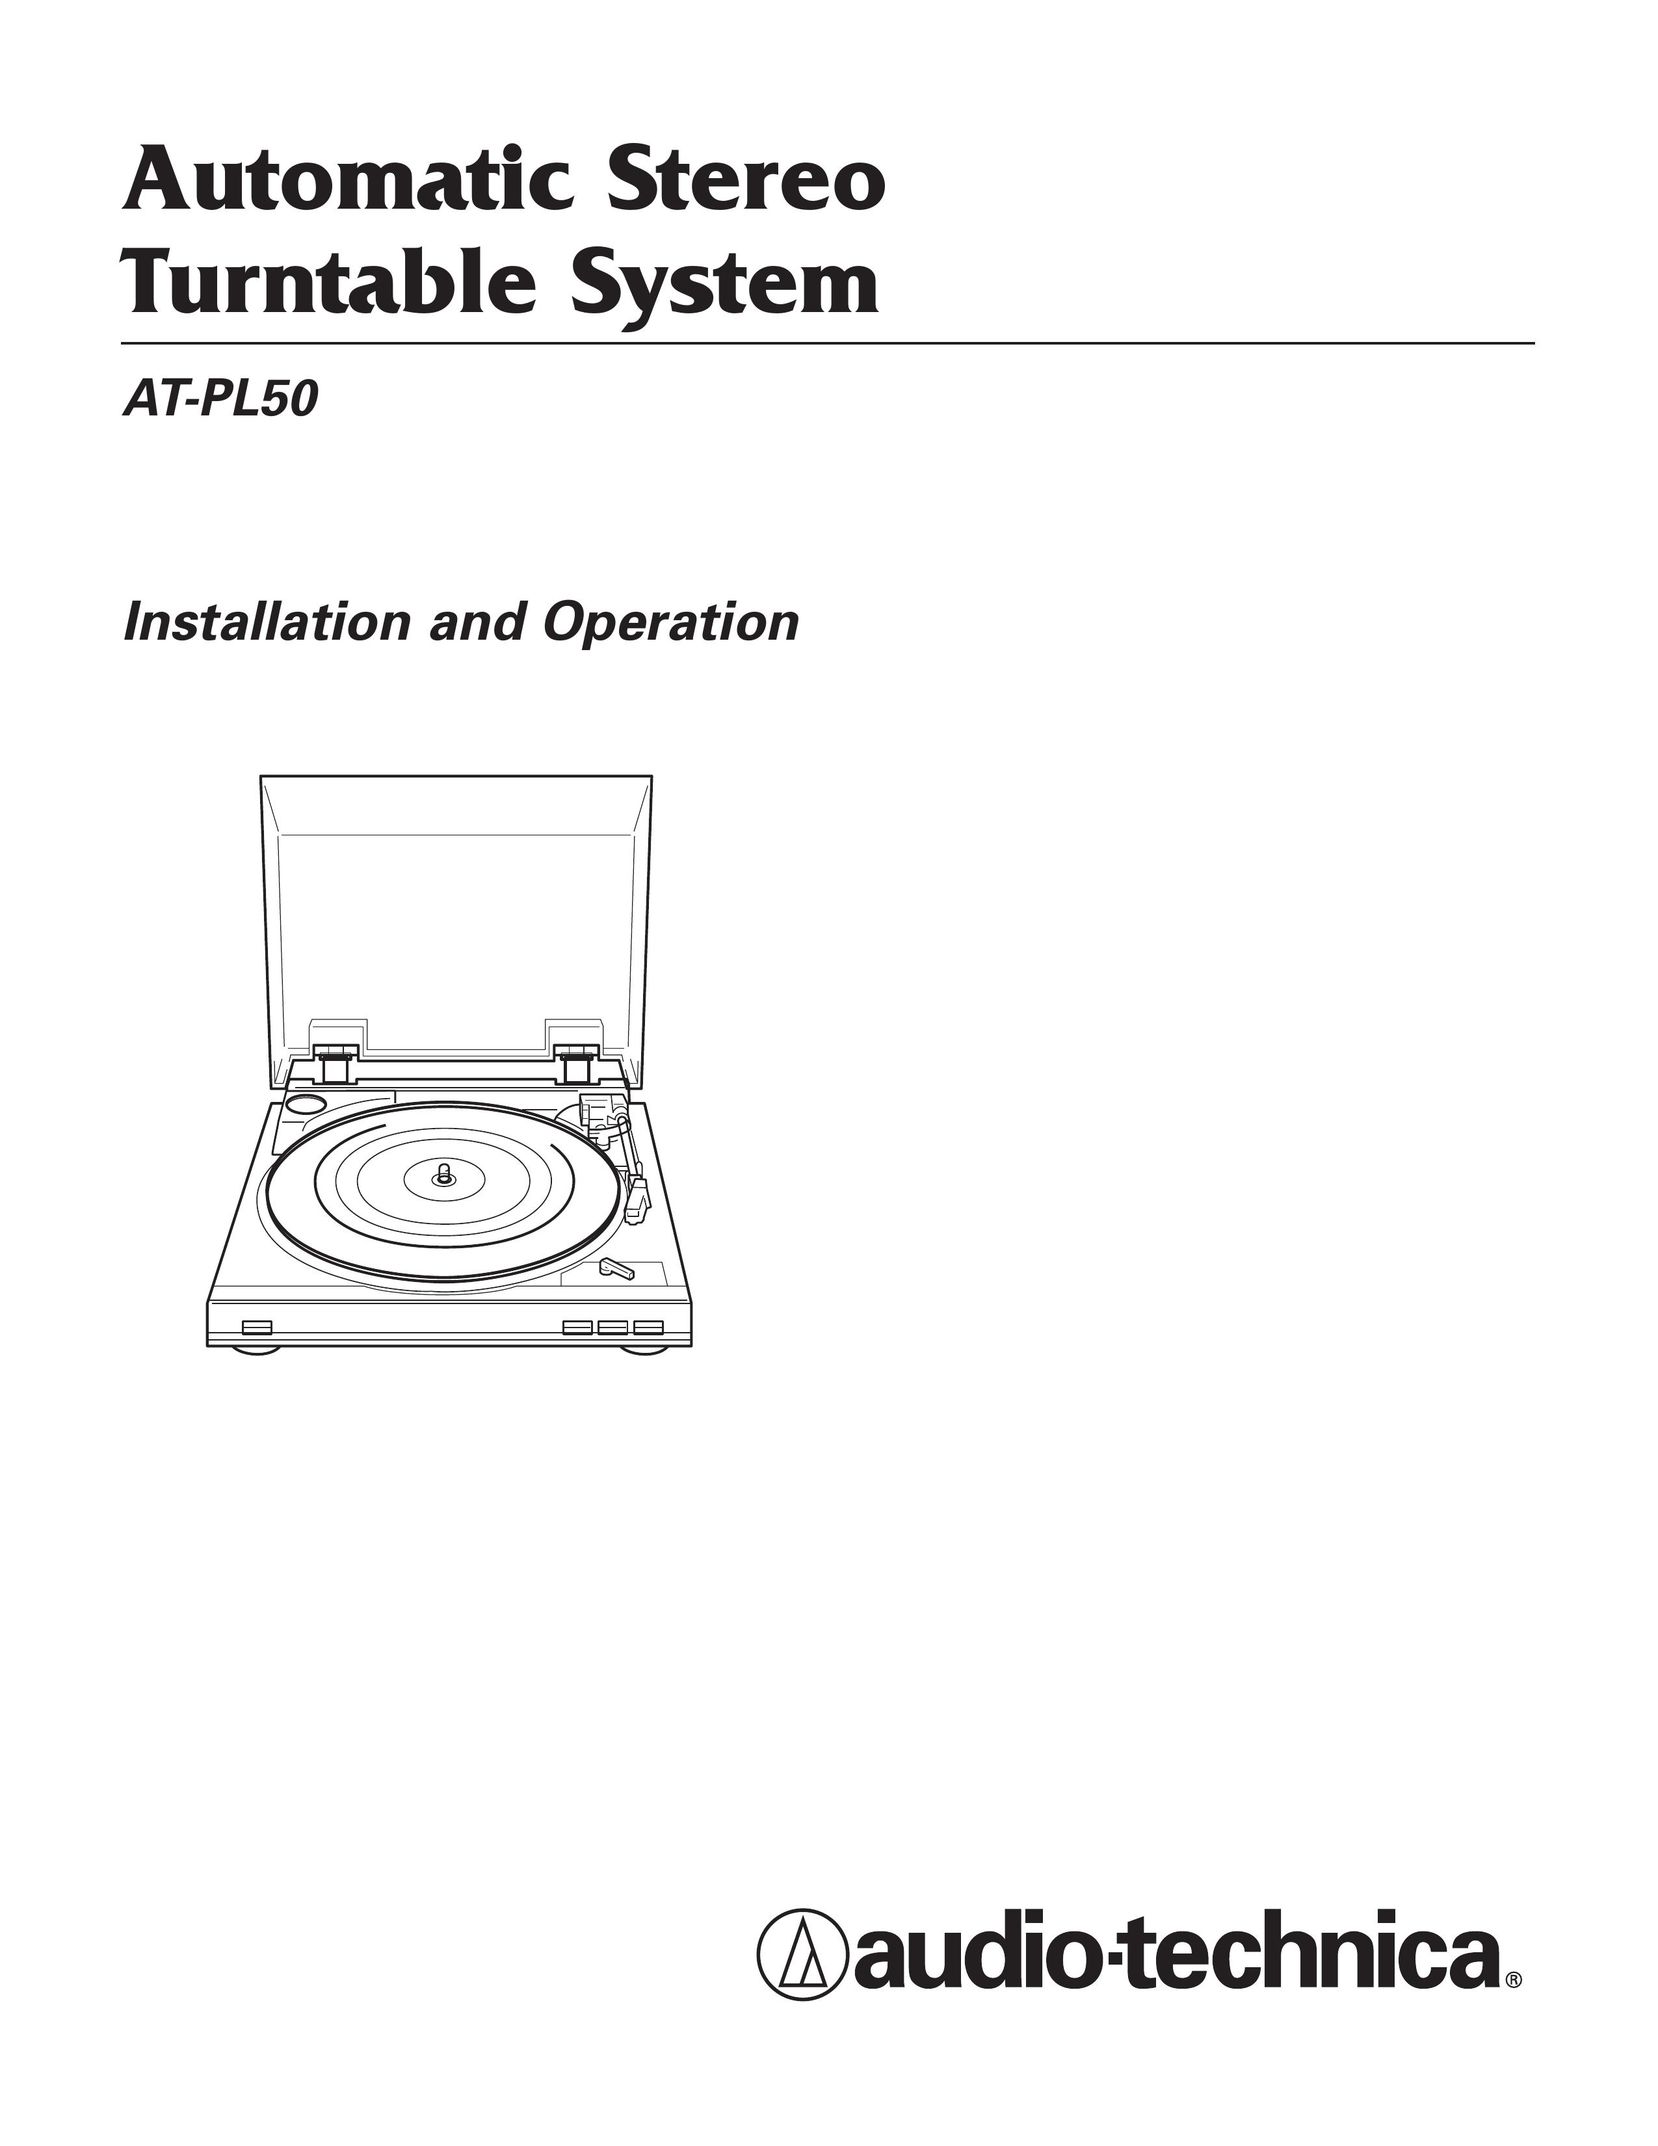 Audio-Technica AT-PL50 Stereo System User Manual